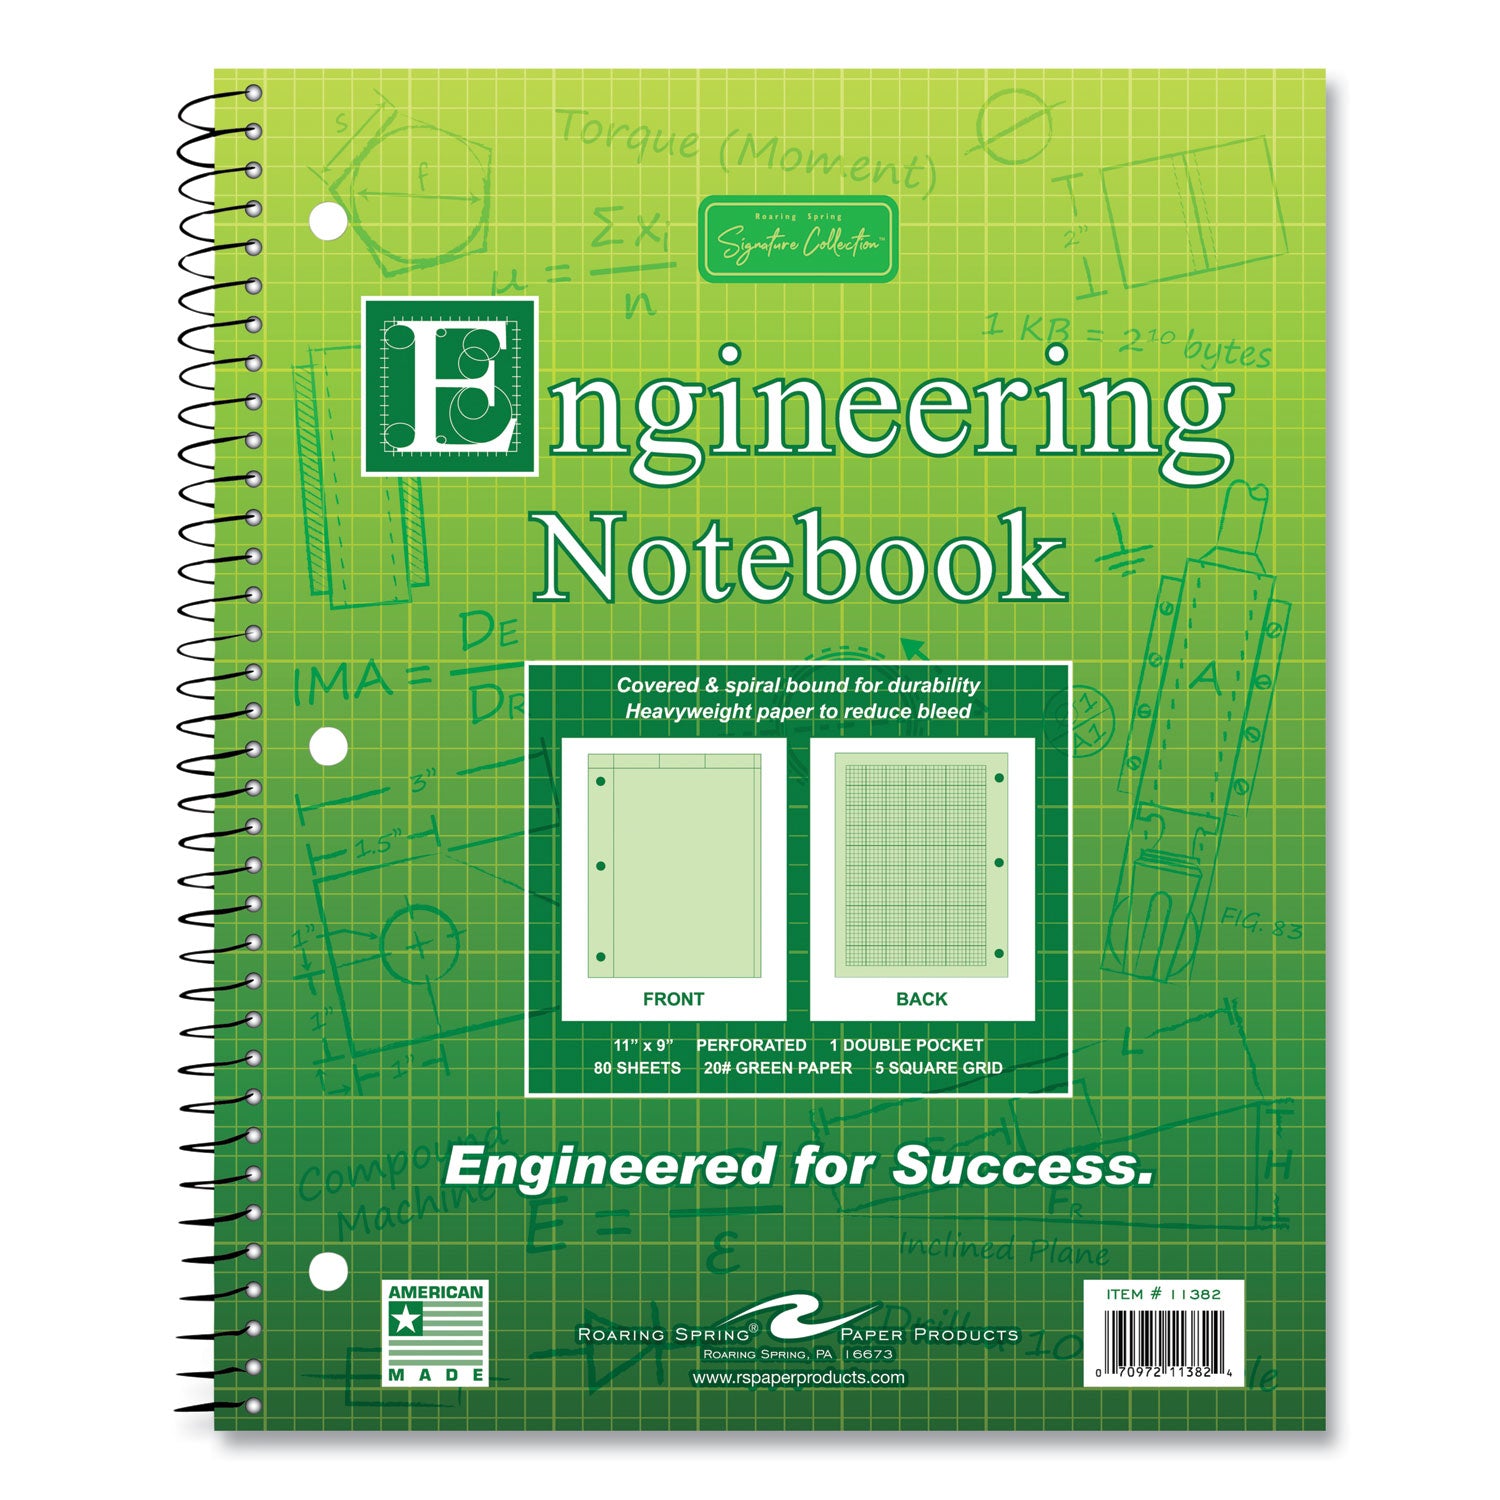 wirebound-engineering-notebook-20-lb-paper-stock-green-cover-80-green-11-x-85-sheets-24-ct-ships-in-4-6-business-days_roa11382cs - 2